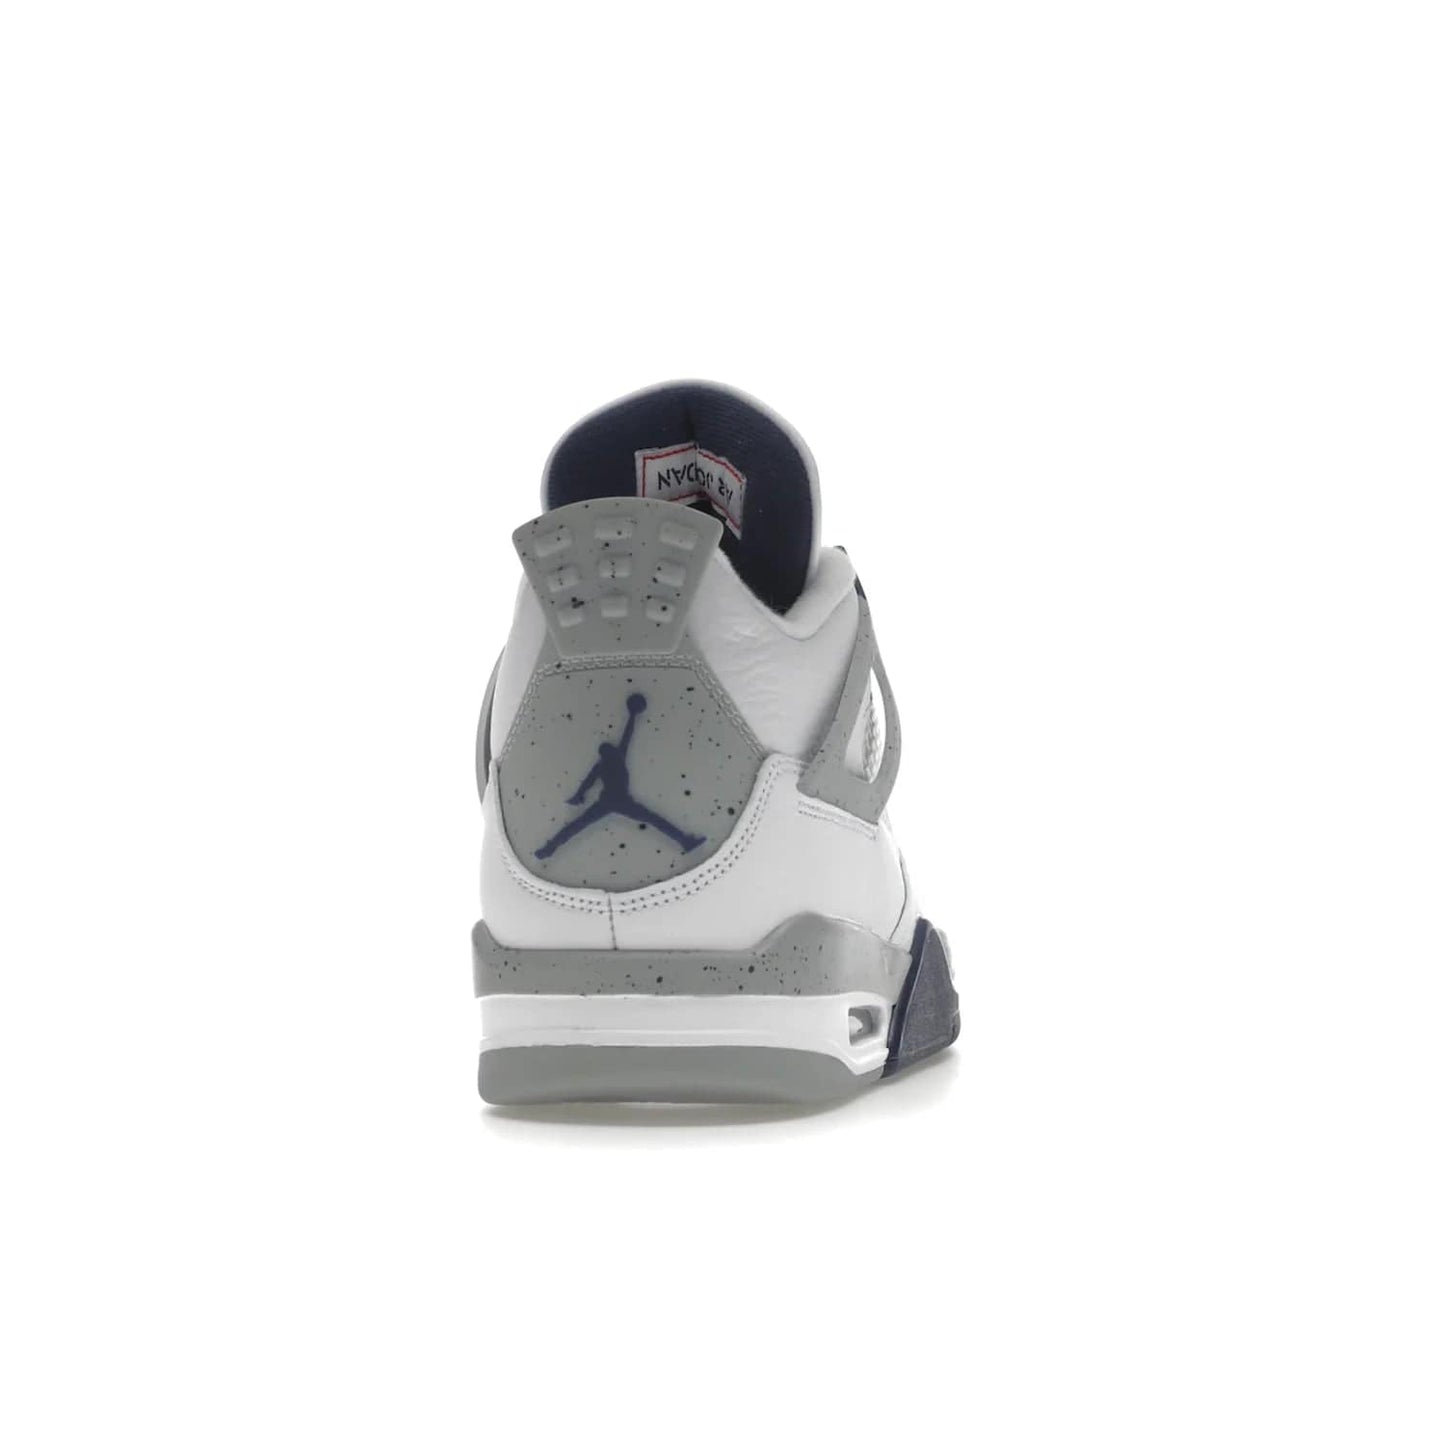 Jordan 4 Retro Midnight Navy - Image 29 - Only at www.BallersClubKickz.com - Shop the Air Jordan Retro 4 White Midnight Navy. Stand out with a classic white leather upper, black support wings, midnight navy eyelets, and Crimson Jumpman tongue tag. Unbeatable comfort with two-tone polyurethane midsole with encapsulated Air technology. Get yours before October 29th, 2022.